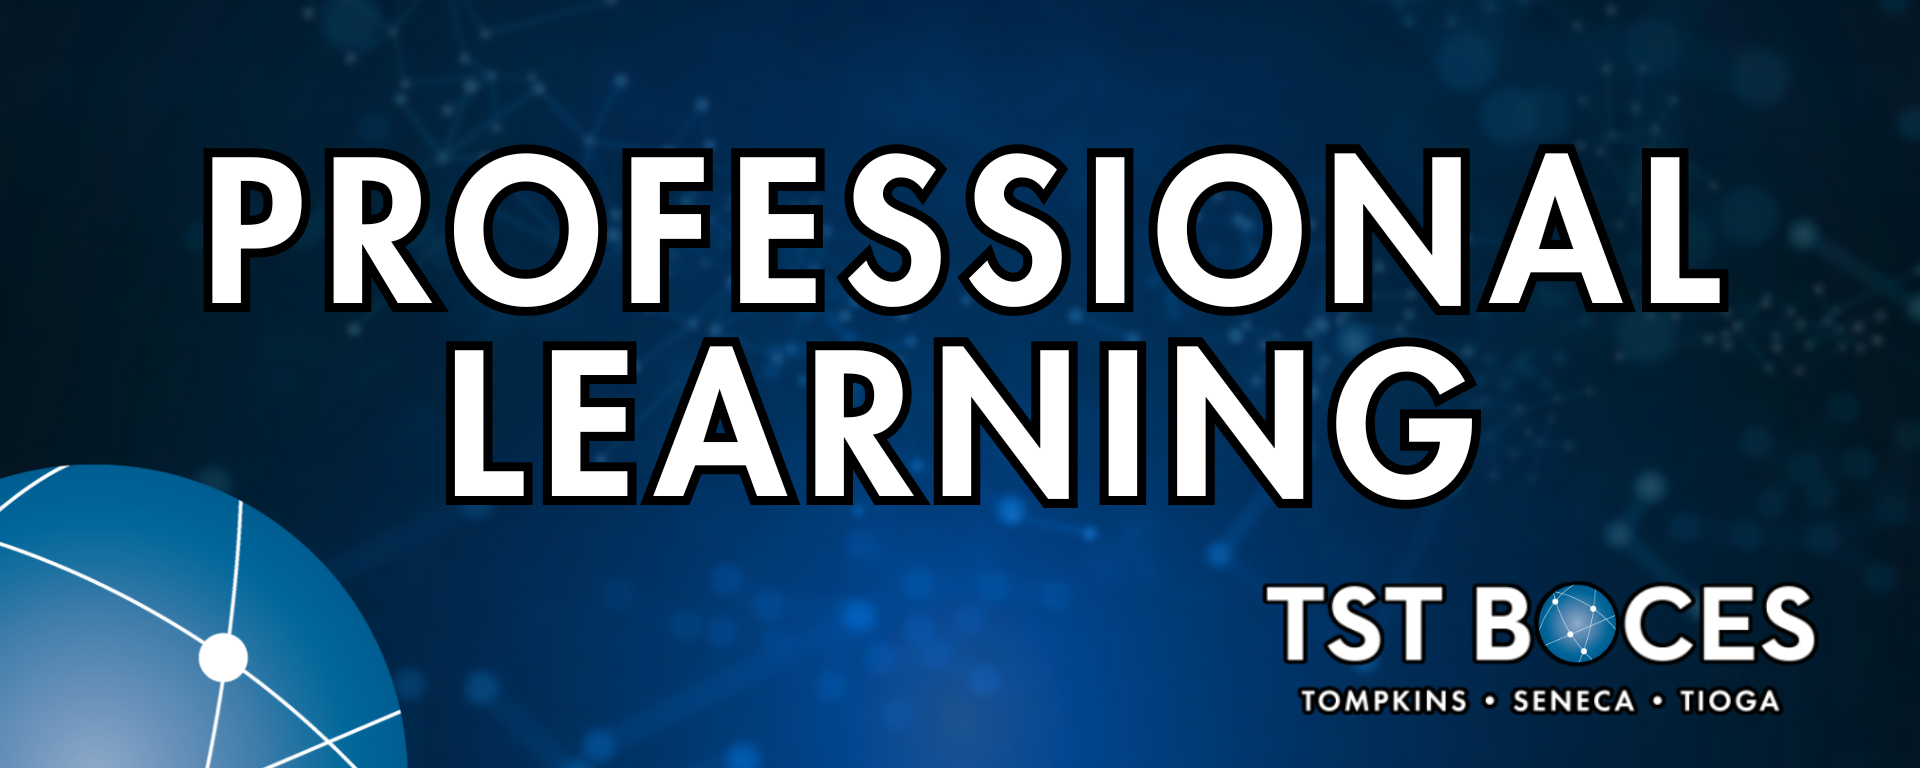 Professional Learning banner